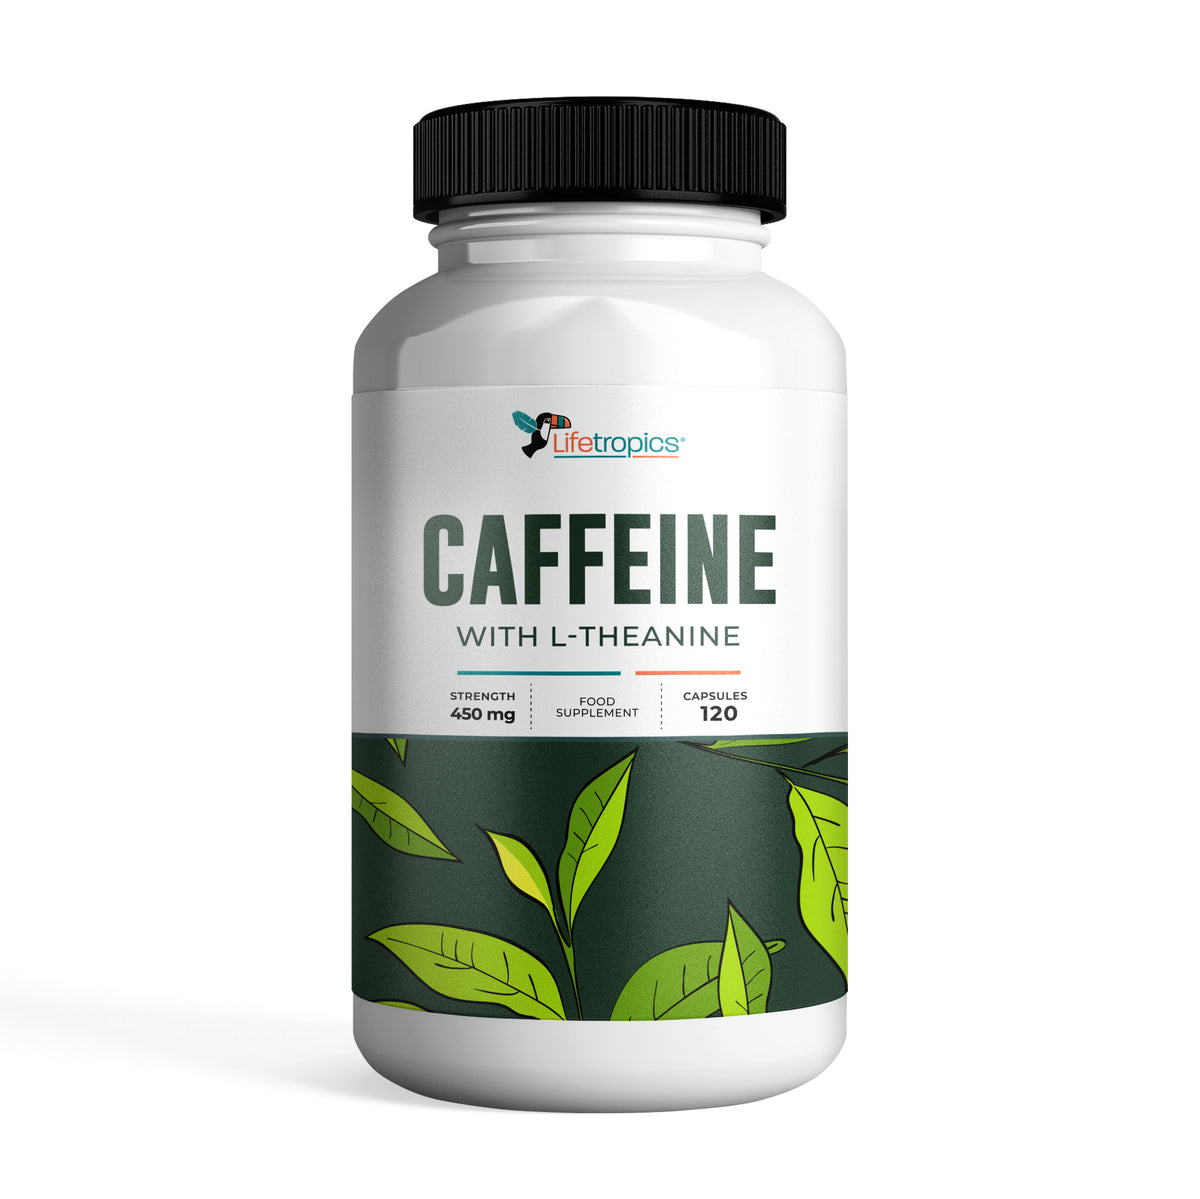 Caffeine and L-Theanine